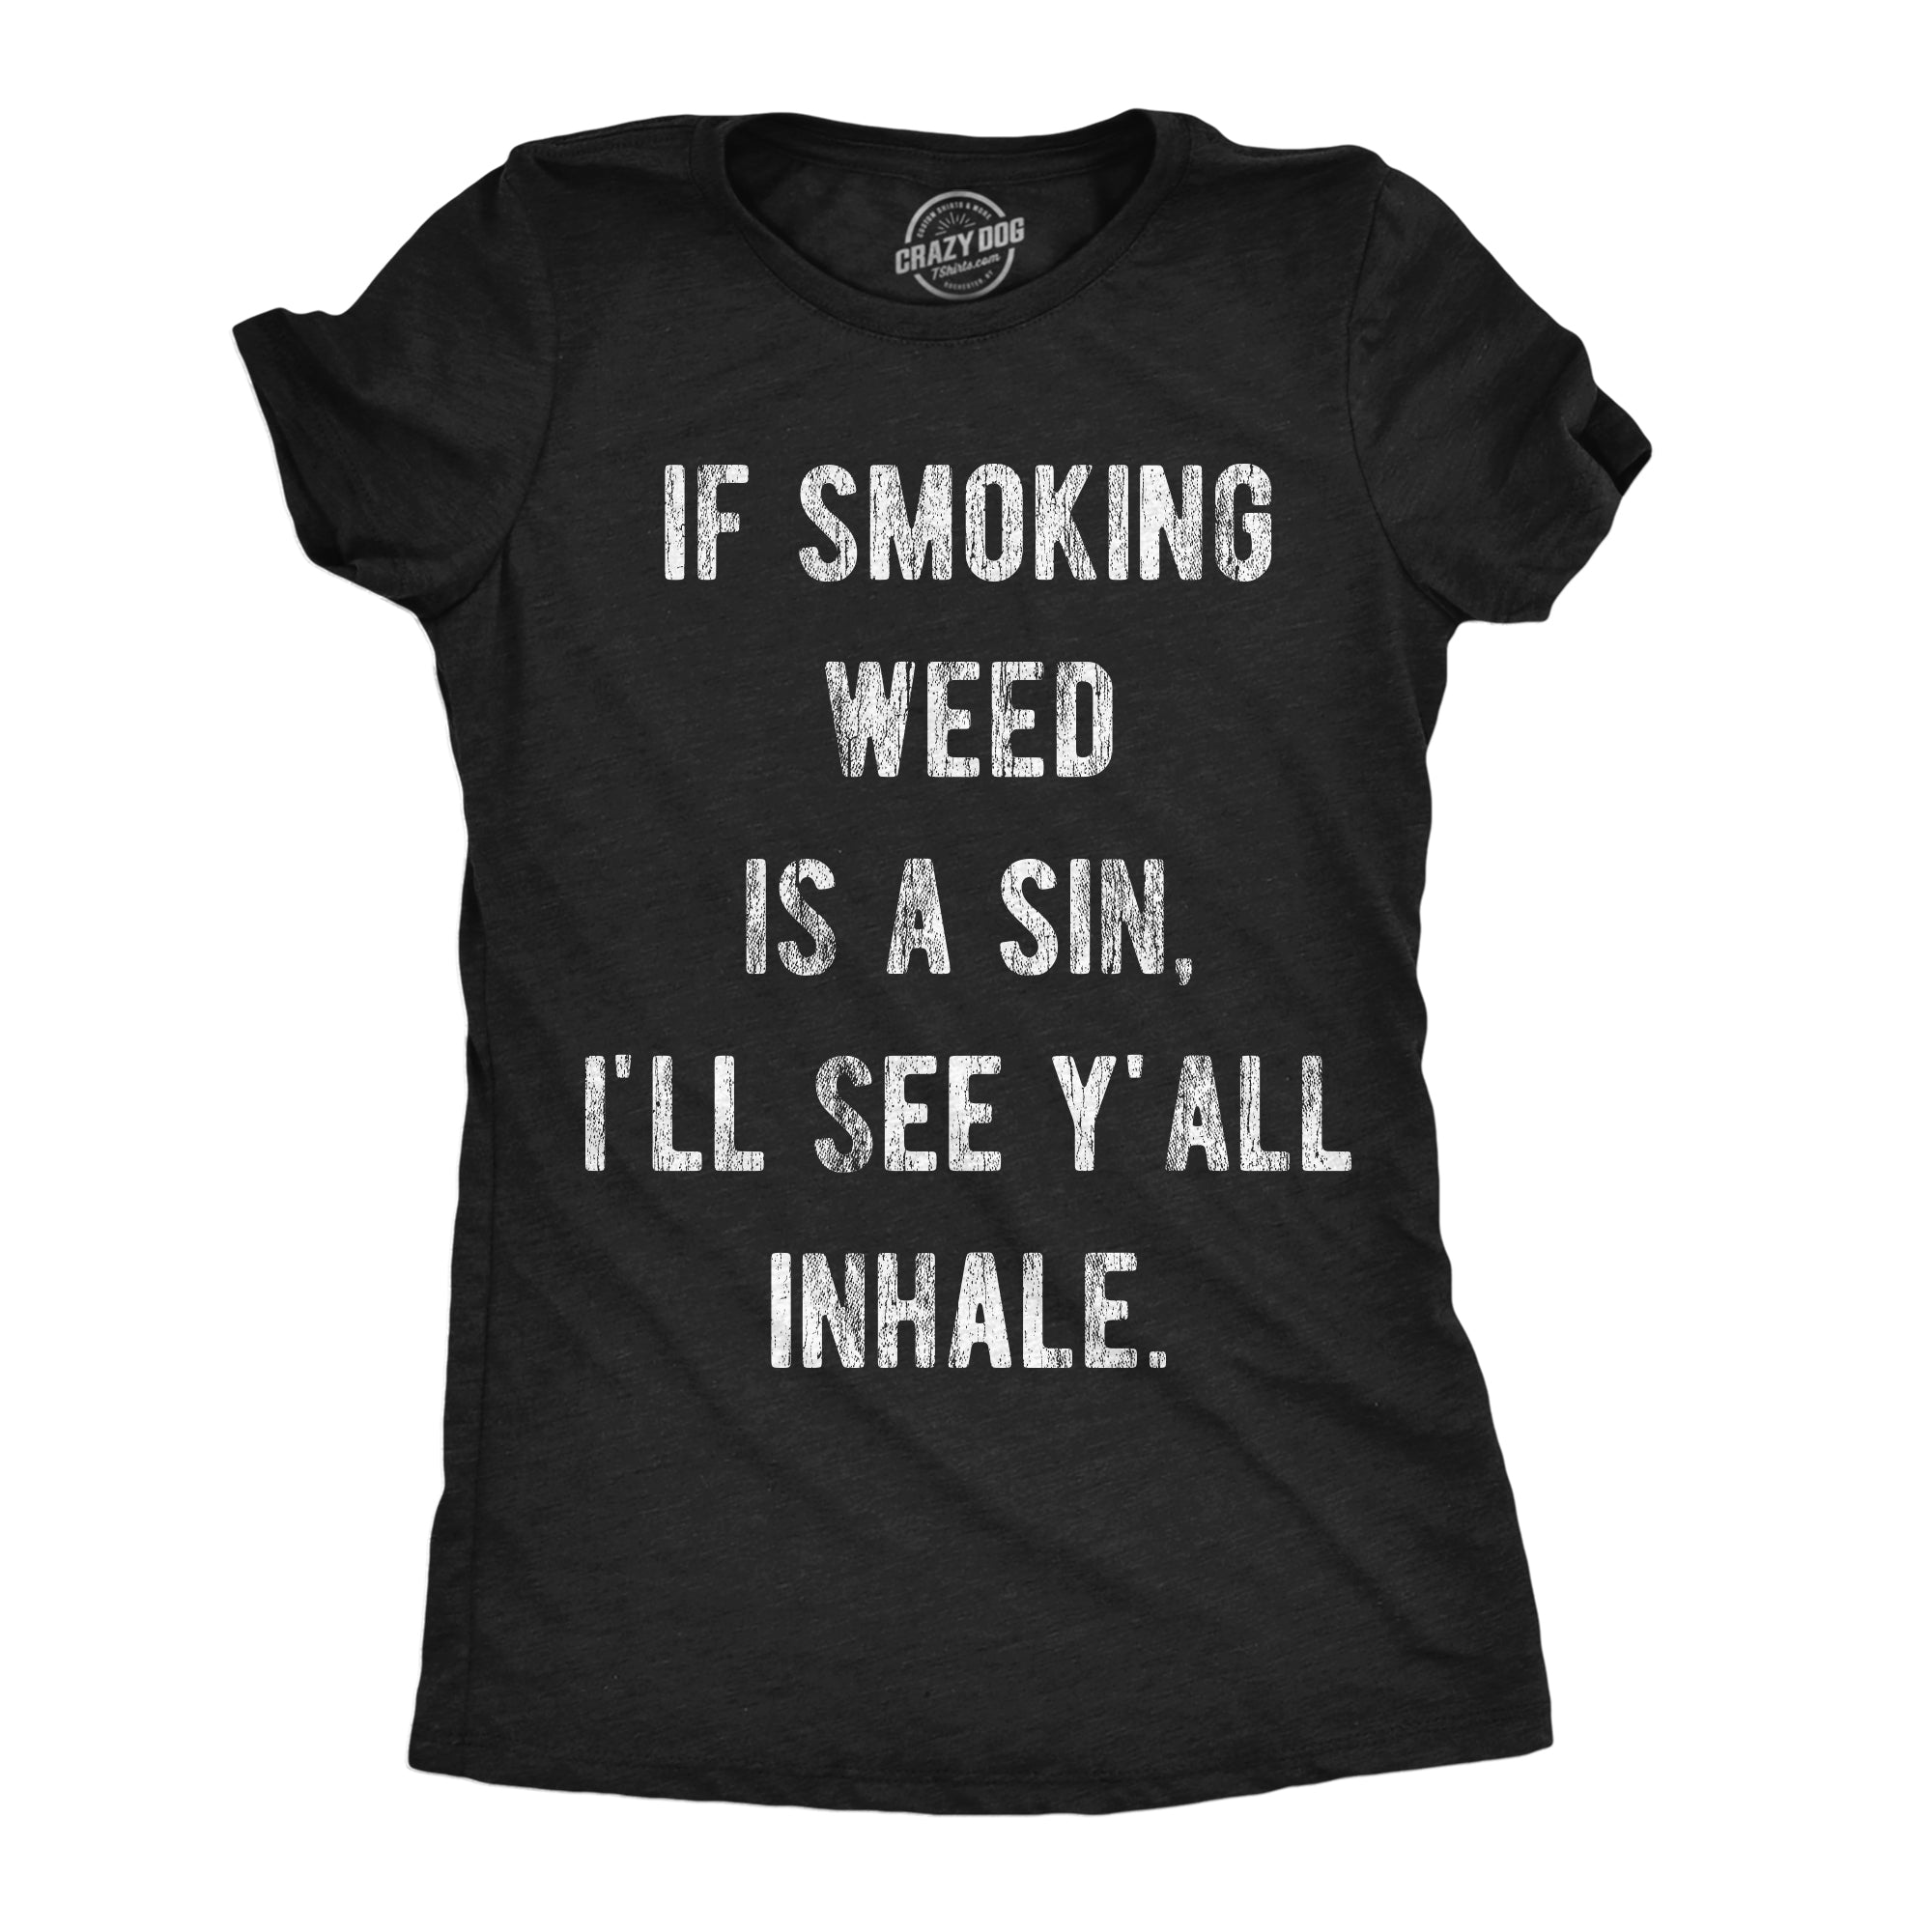 Funny Heather Black - Inhale If Smoking Weed Is A Sin Ill See You Inhale Womens T Shirt Nerdy 420 sarcastic Tee